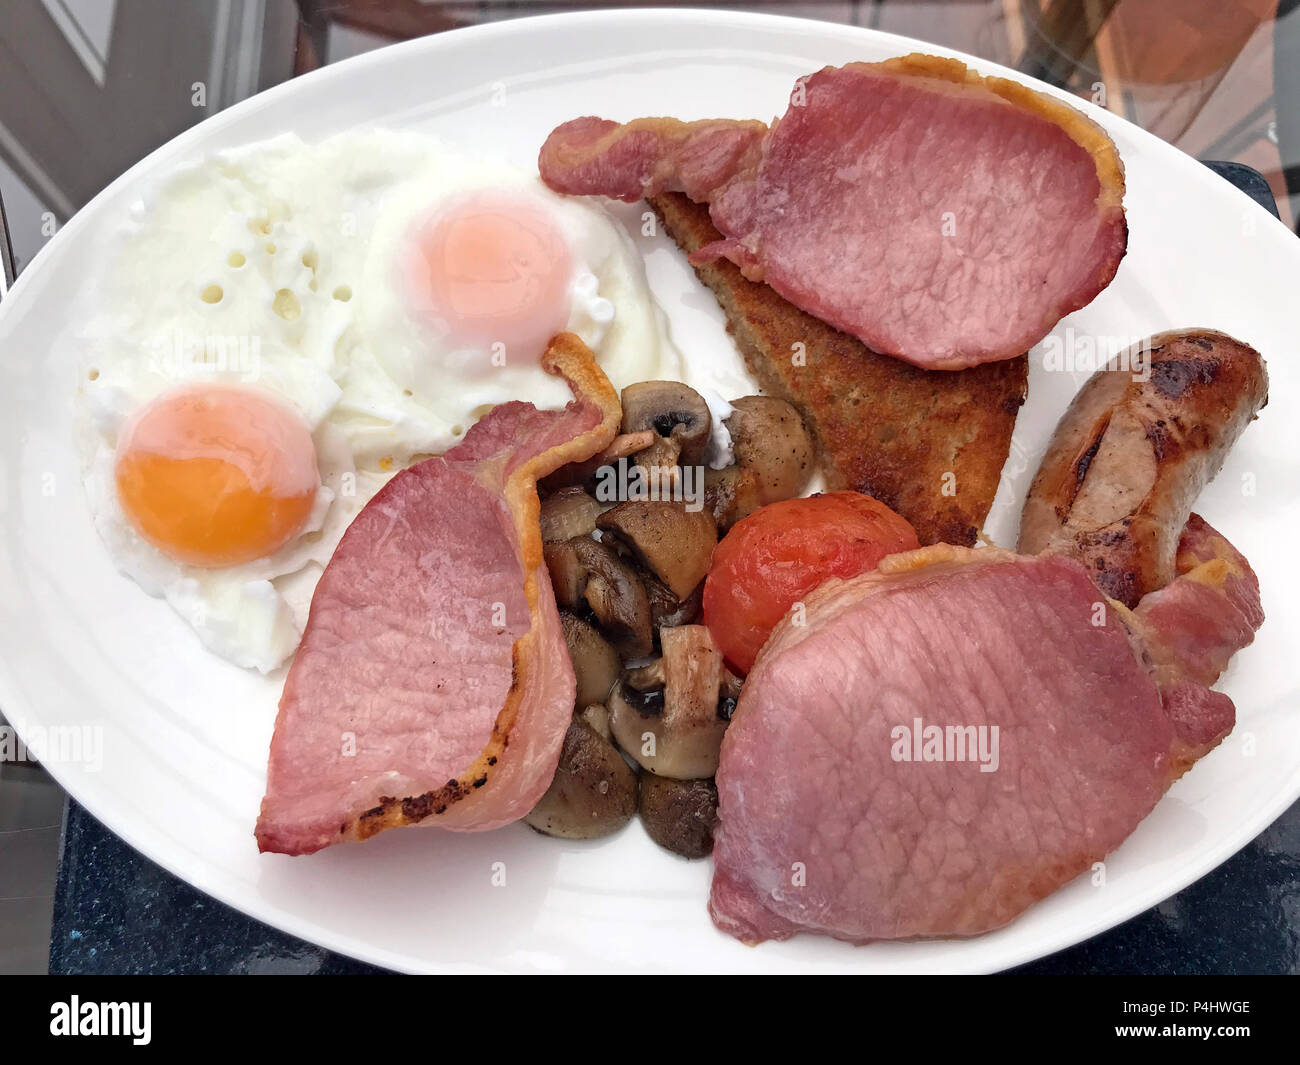 English cooked breakfast, fry up,fried eggs,sausage,fried bacon,mushrooms,tomato,fried bread,on a plate Stock Photo